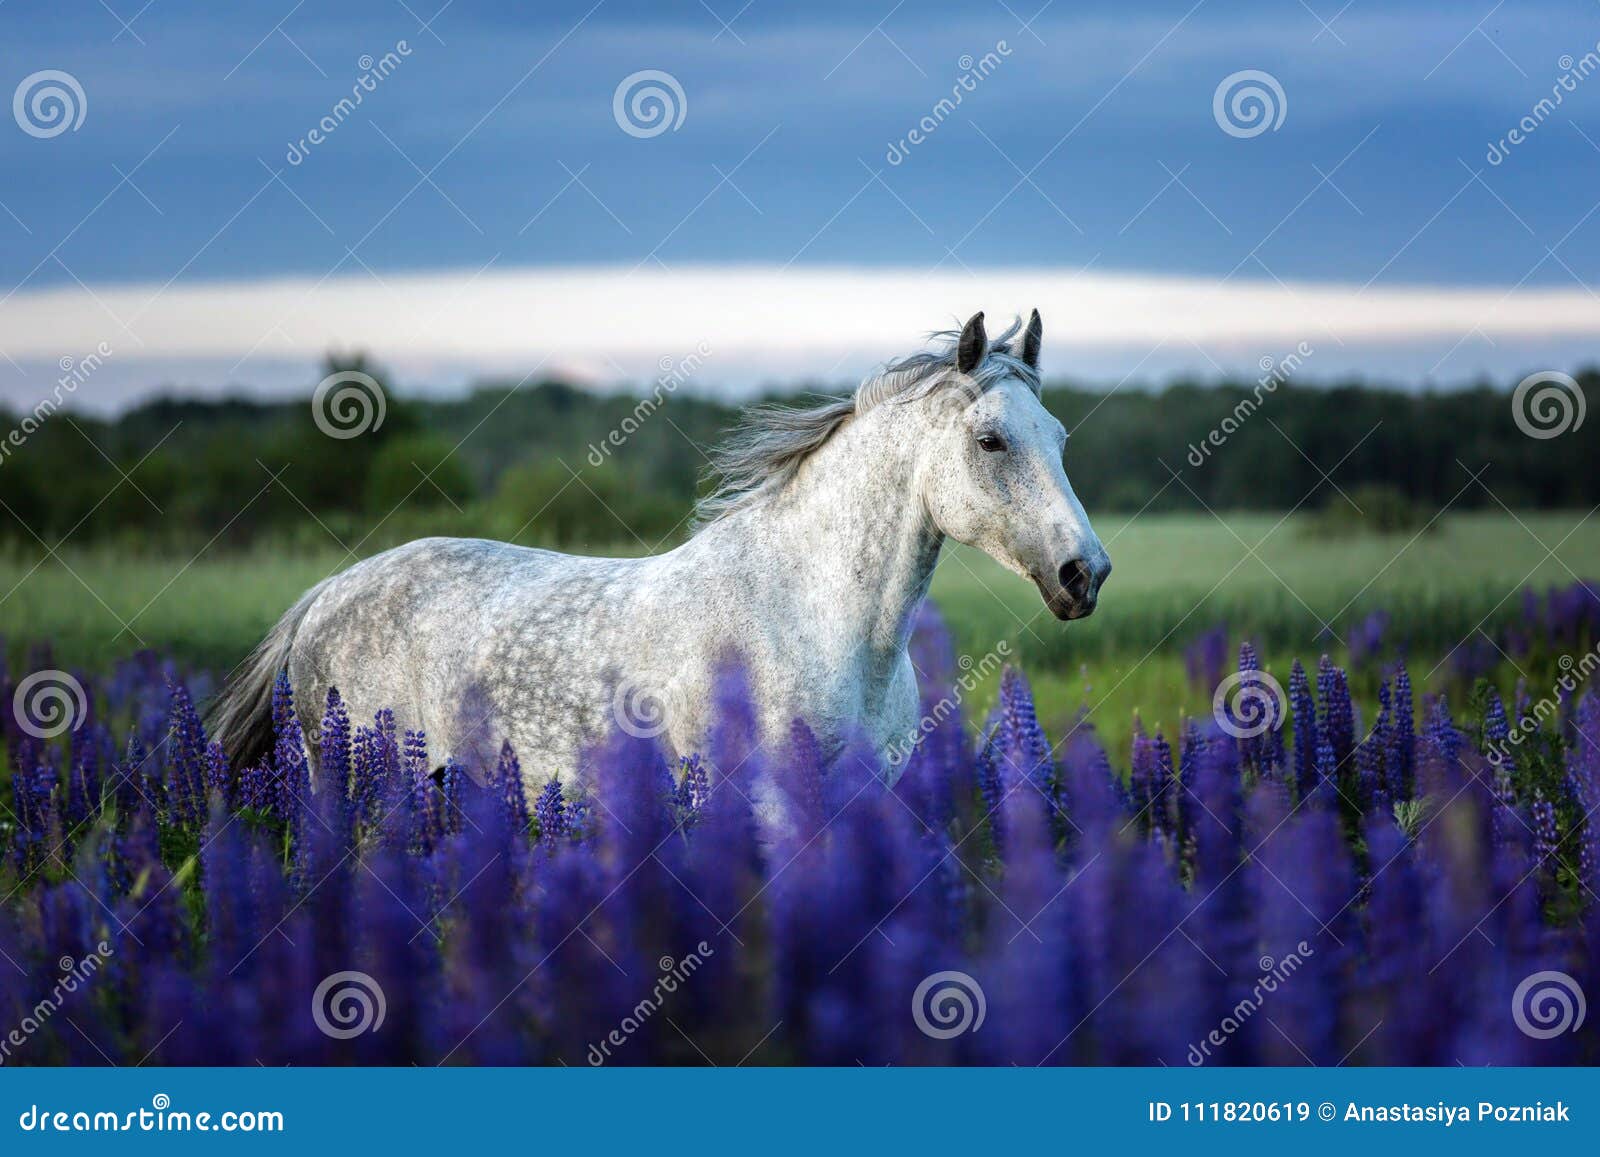 Portrait Of A Grey Horse Among Lupine Flowers Stock Image Image Of Flowers Arabian 111820619